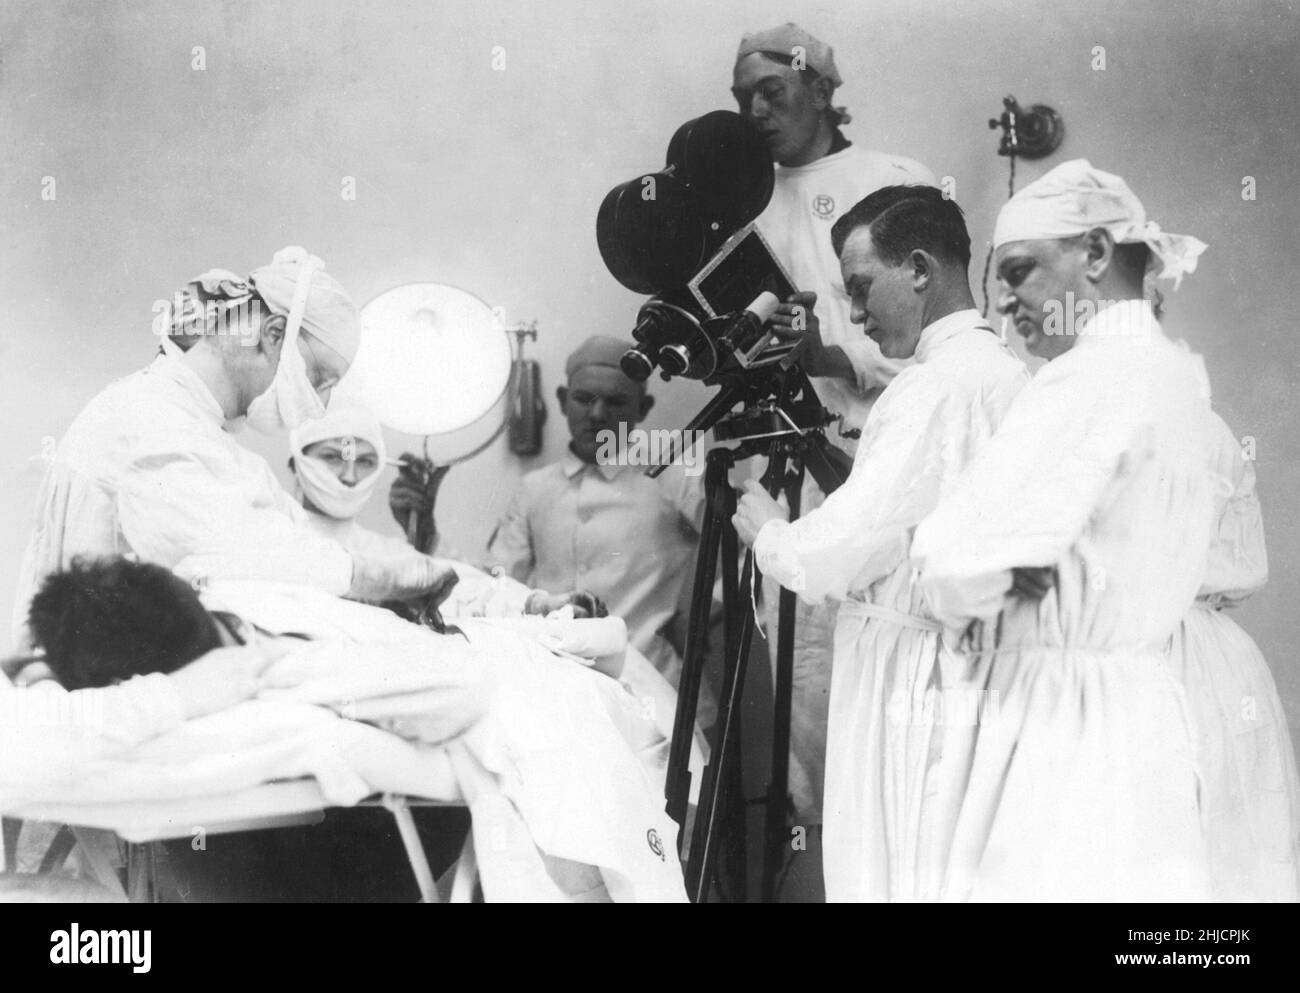 Filming a hernia operation at Walter Reed Hospital, 1918, during World War I. Stock Photo